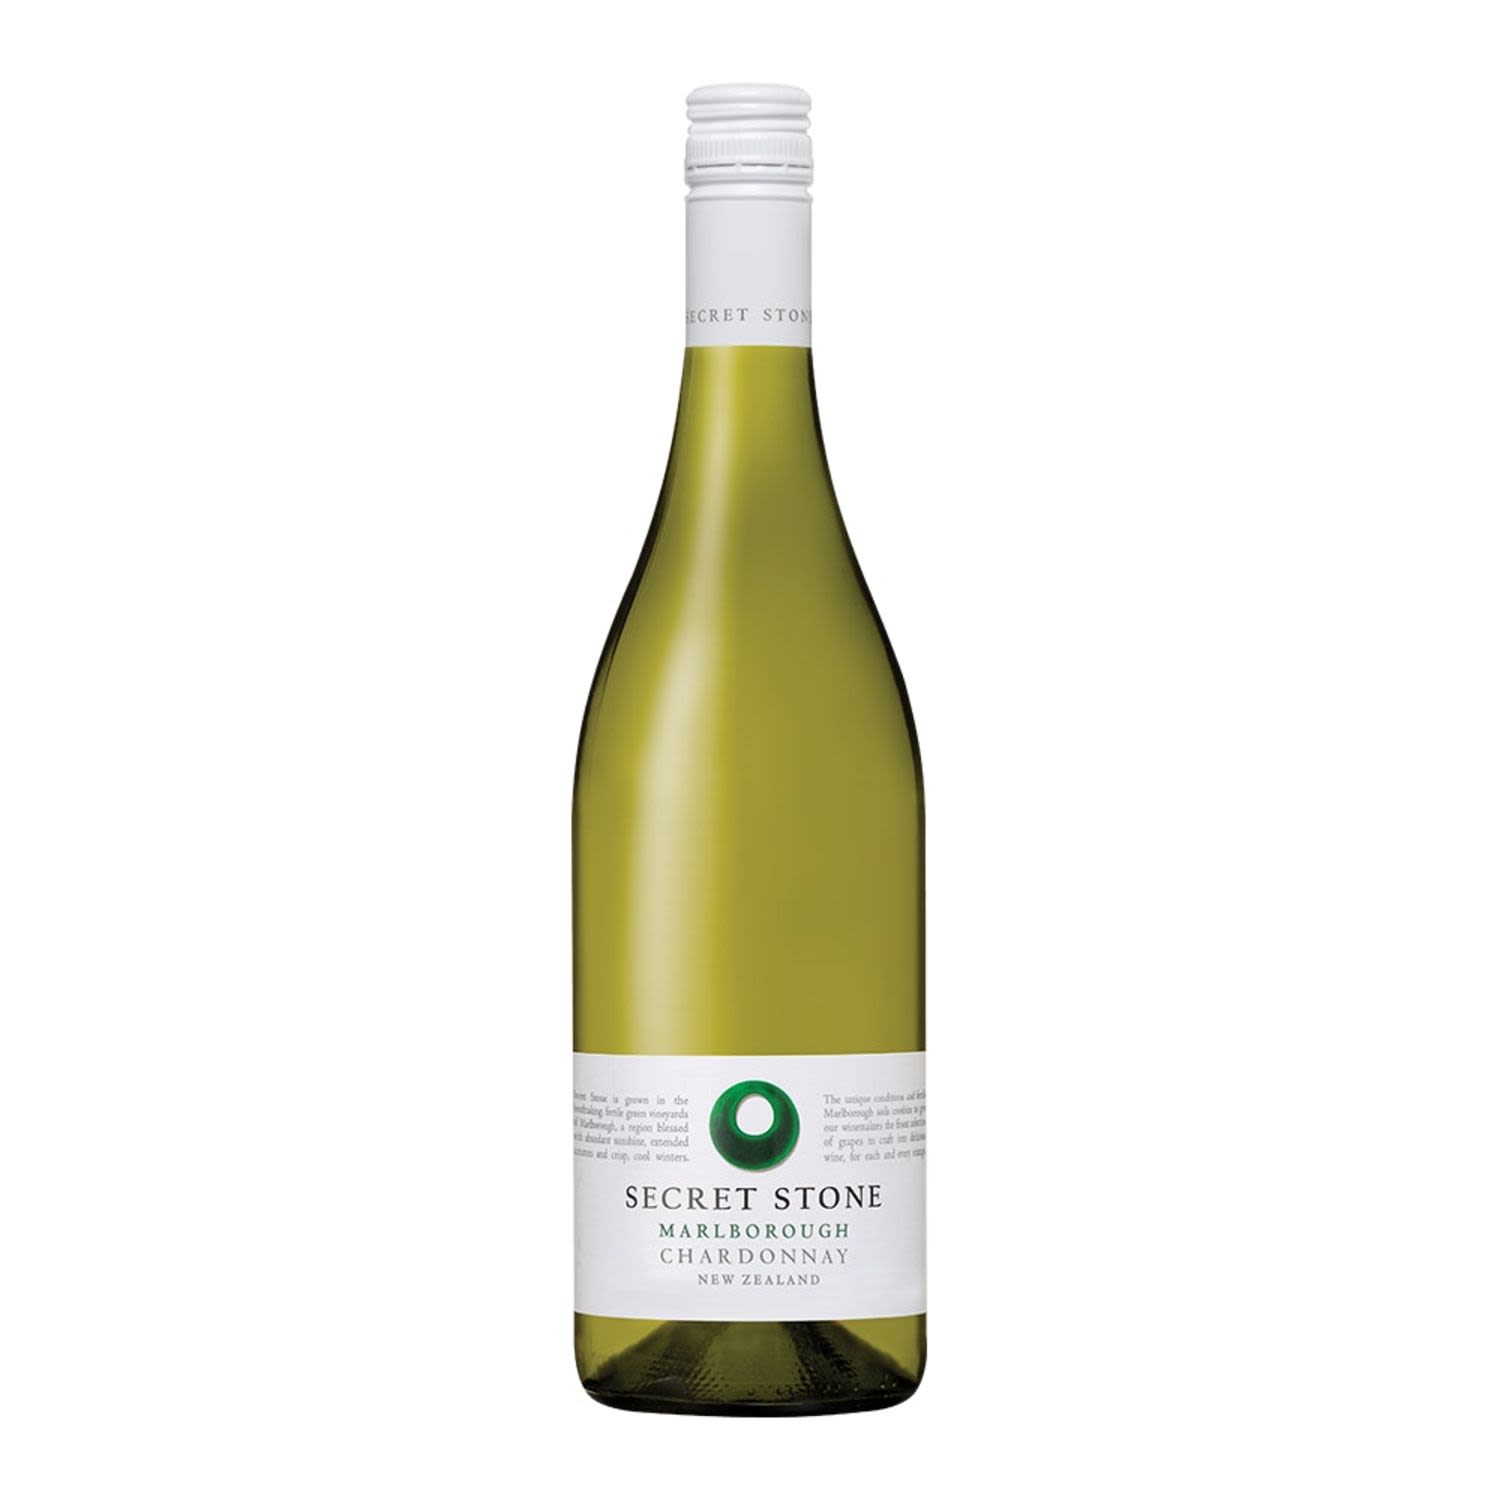 The aroma is a delightful blend of buttery characters underlined with tropical & citrus fruits. Well structured & full. Bursts of intense stone fruit backed by fine oak that give length to the palate.<br /> <br />Alcohol Volume: 13.00%<br /><br />Pack Format: Bottle<br /><br />Standard Drinks: 7.7</br /><br />Pack Type: Bottle<br /><br />Country of Origin: New Zealand<br /><br />Region: Marlborough<br /><br />Vintage: Non Vintage<br />